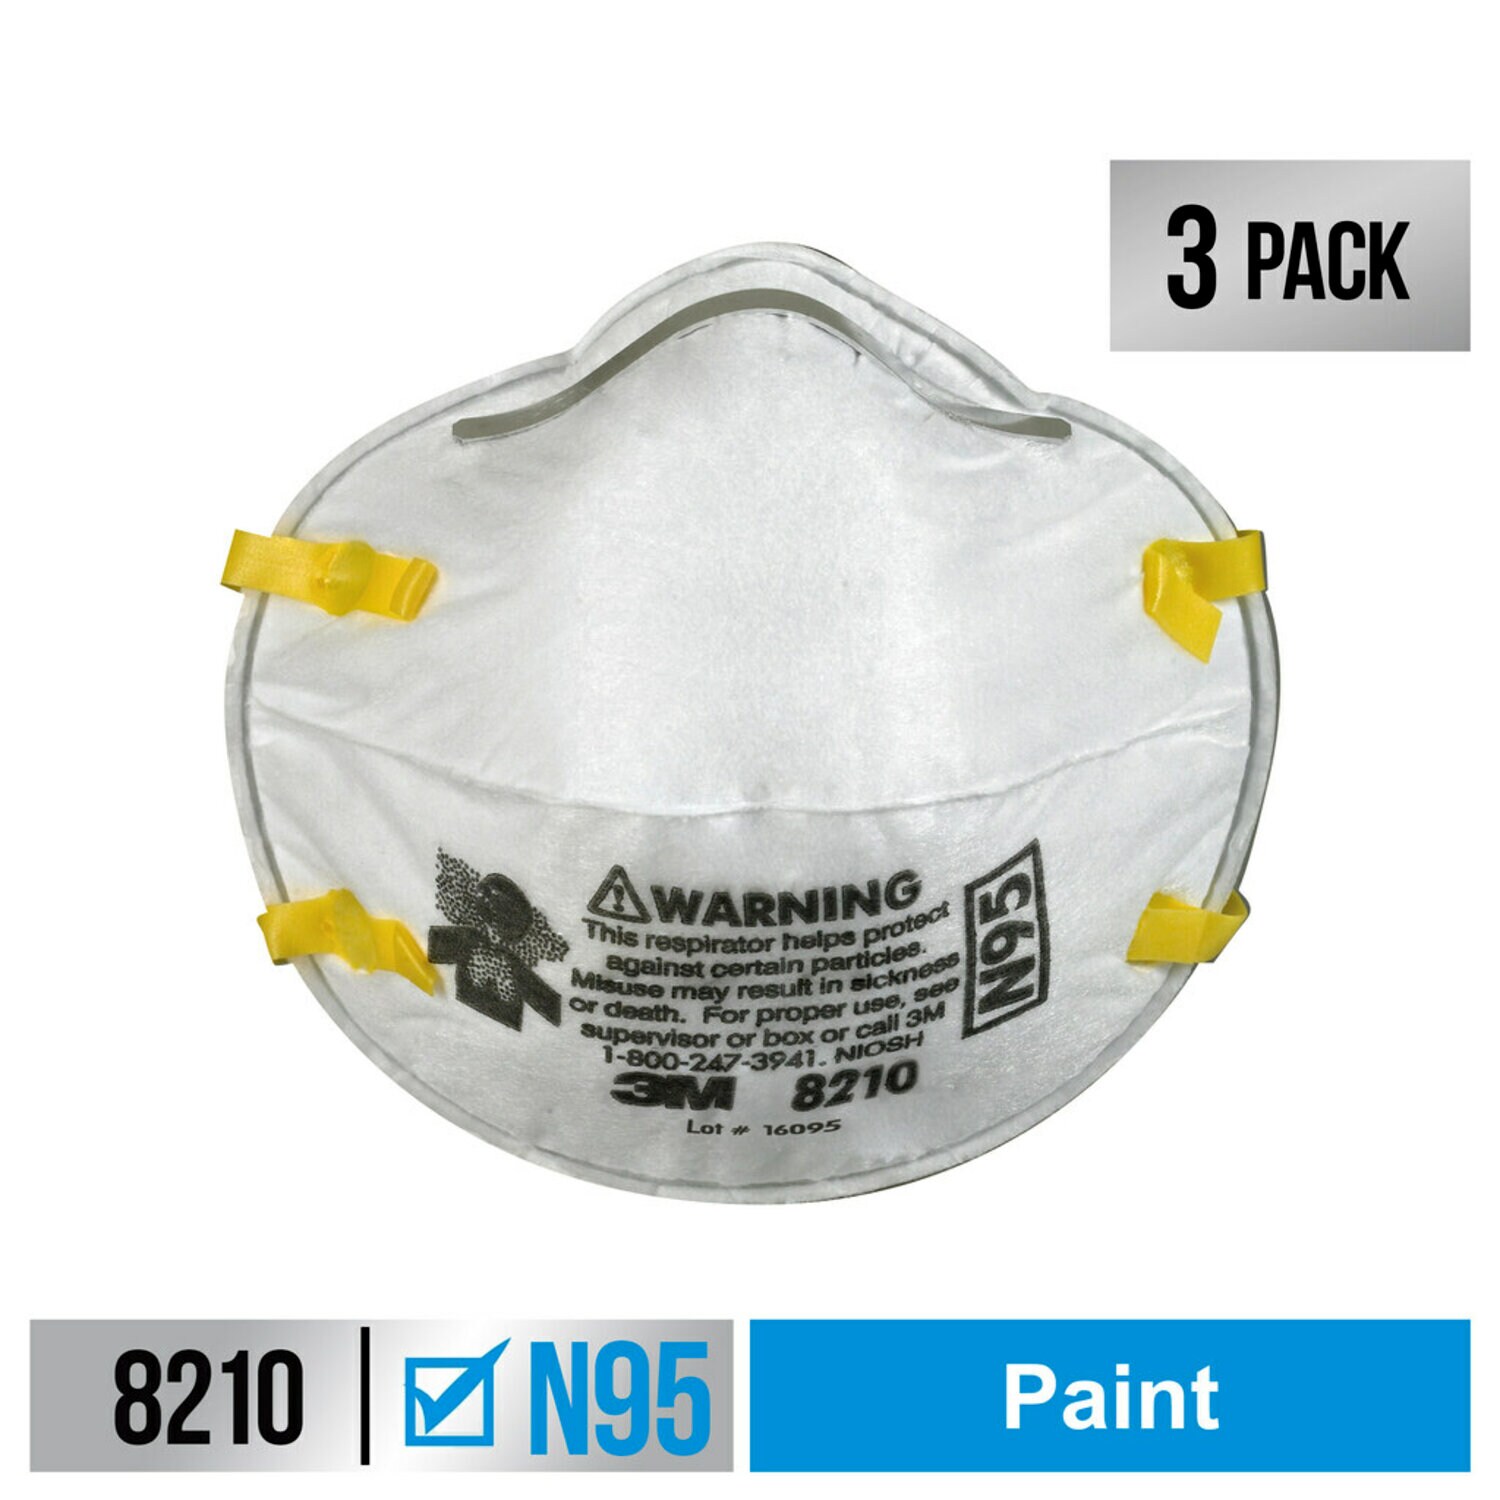 7100159404 - 3M Performance Paint Prep Respirator N95 Particulate, 8210P3-DC, 3
eaches/pack, 12 packs/case